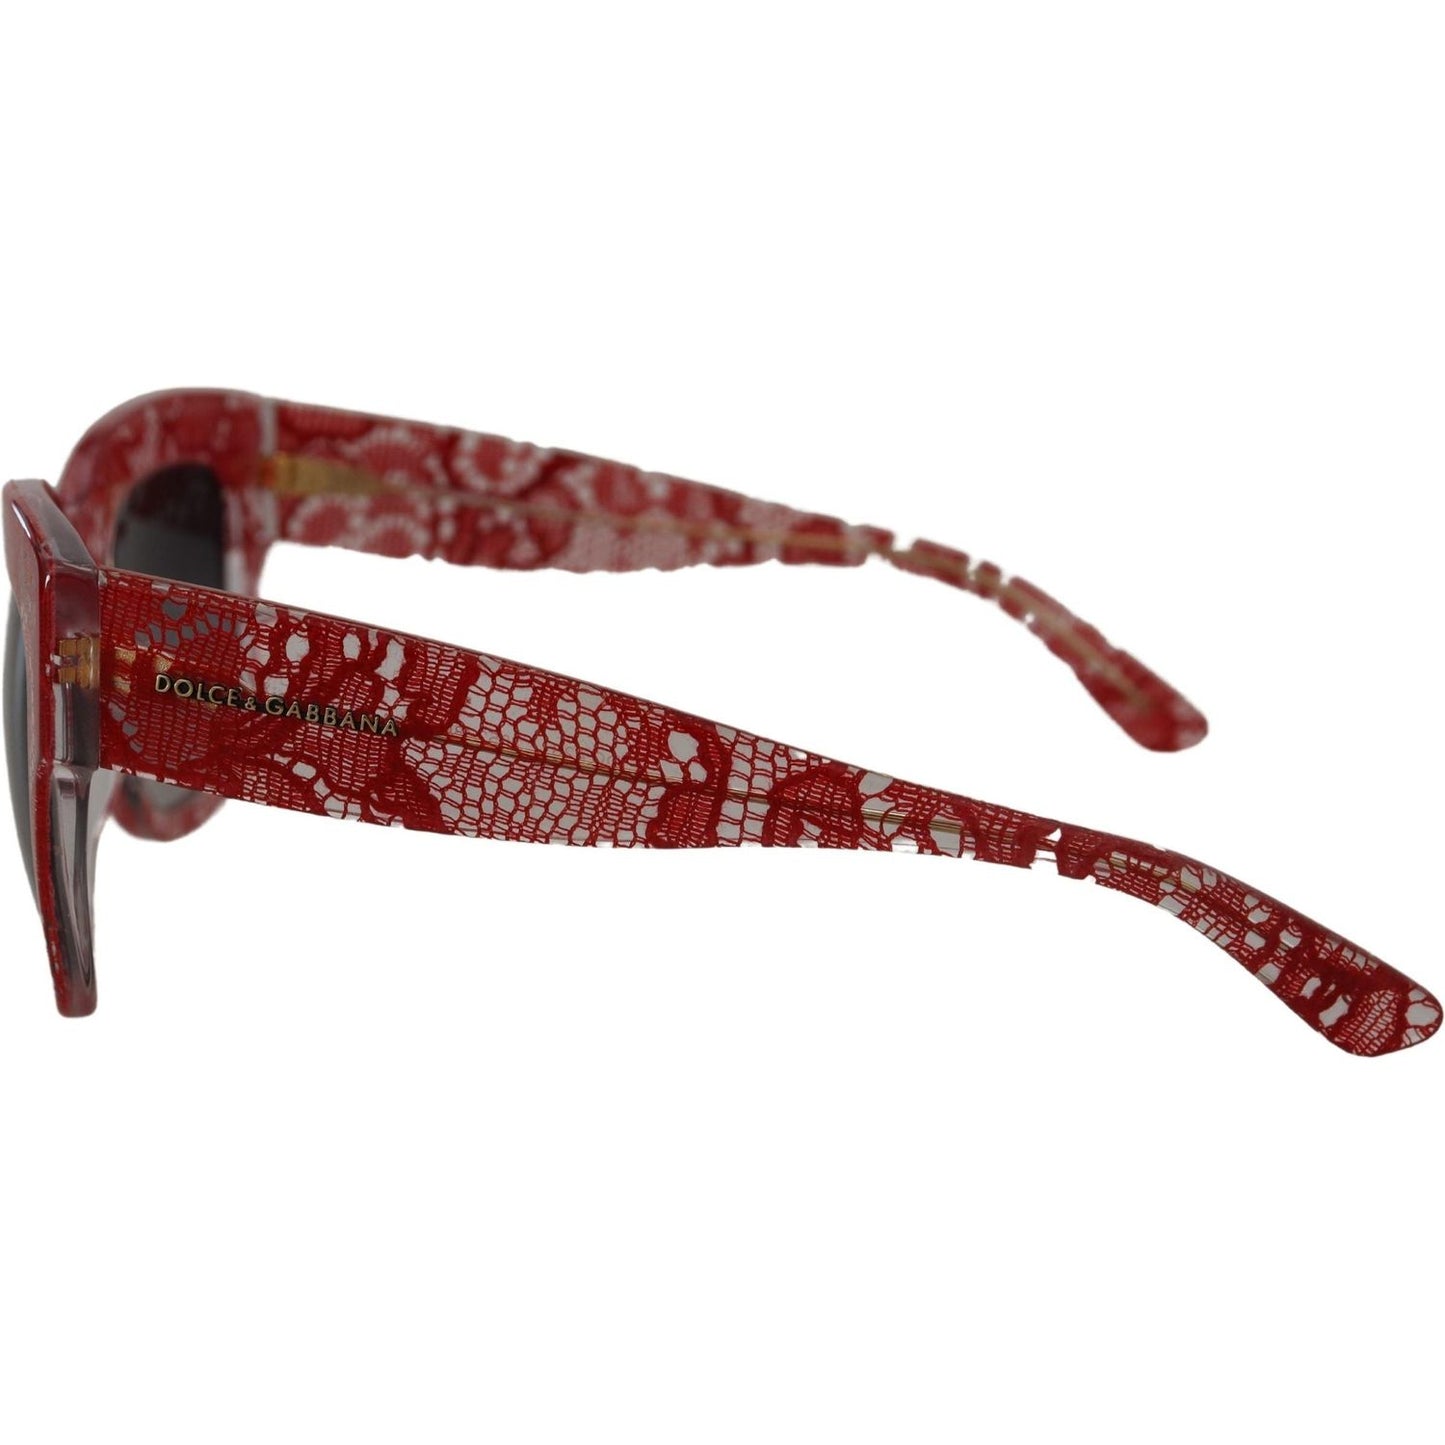 Dolce & Gabbana Chic Sicilian Lace Tinted Sunglasses red-lace-acetate-rectangle-shades-dg4231sunglasses